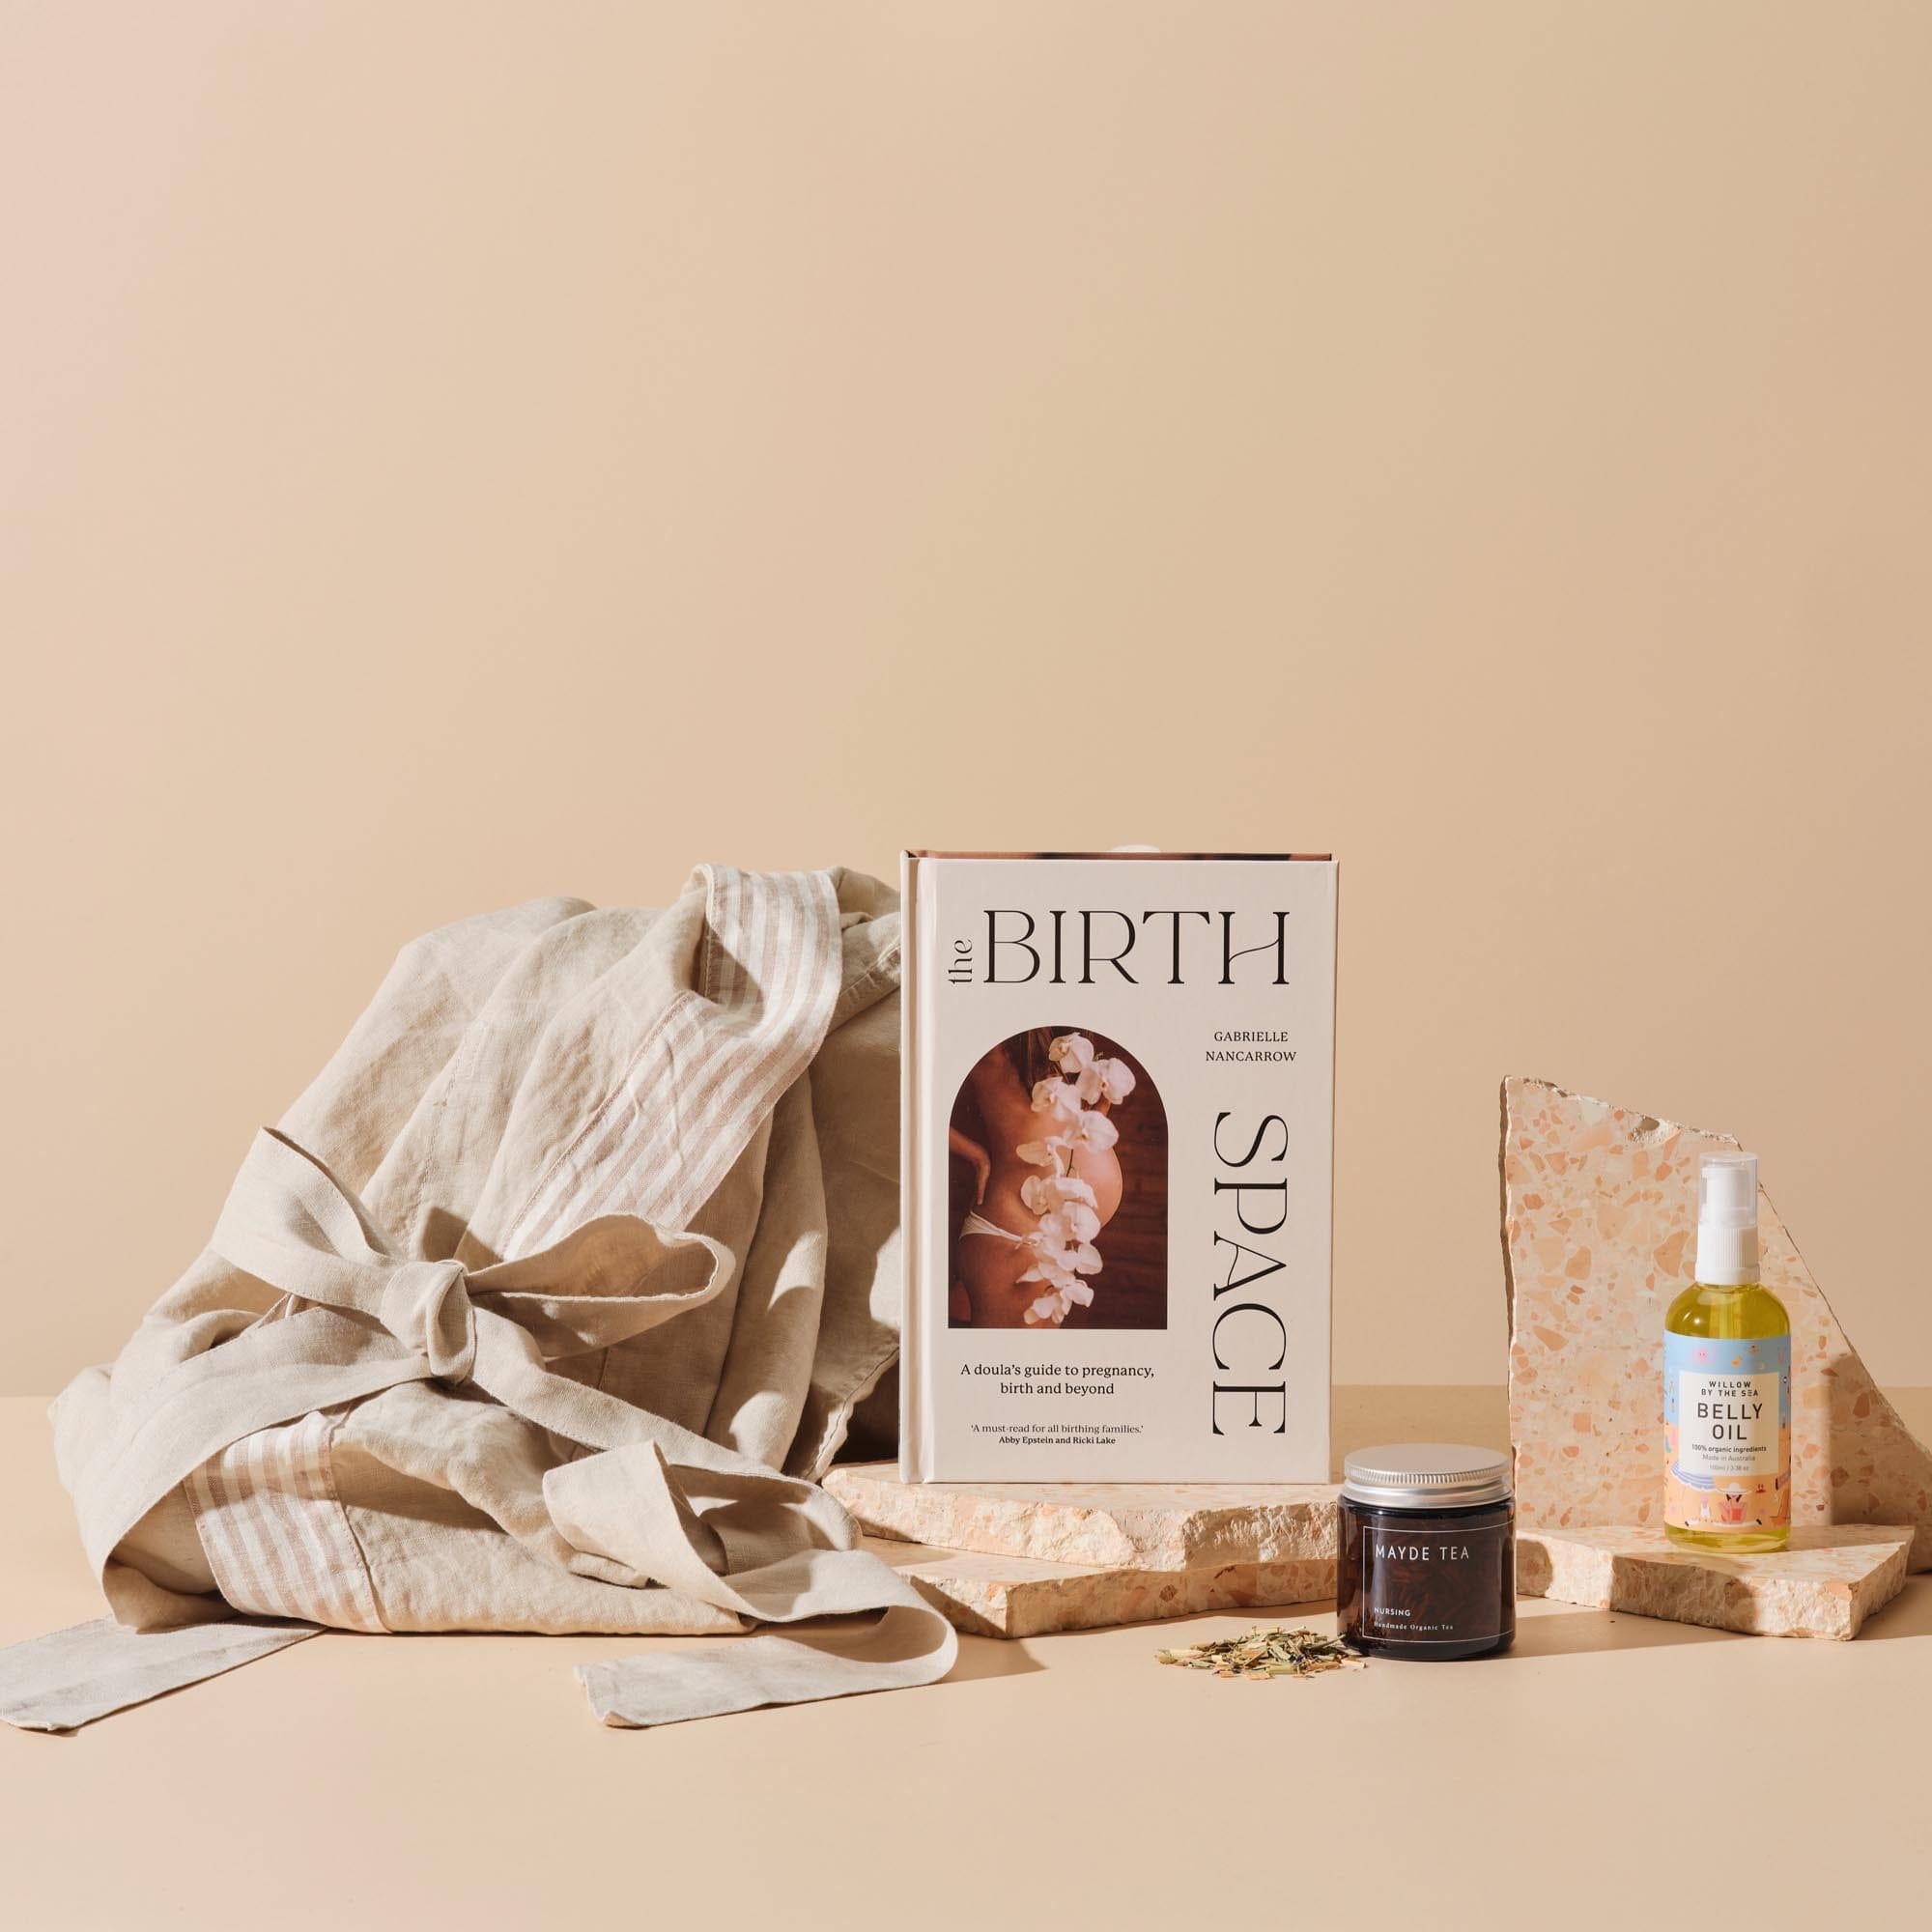 This is the Hey Mama gift bundle from Handsel. Included in this image is The Birth Space, Belly oil, Mayde tea and a Linen Robe